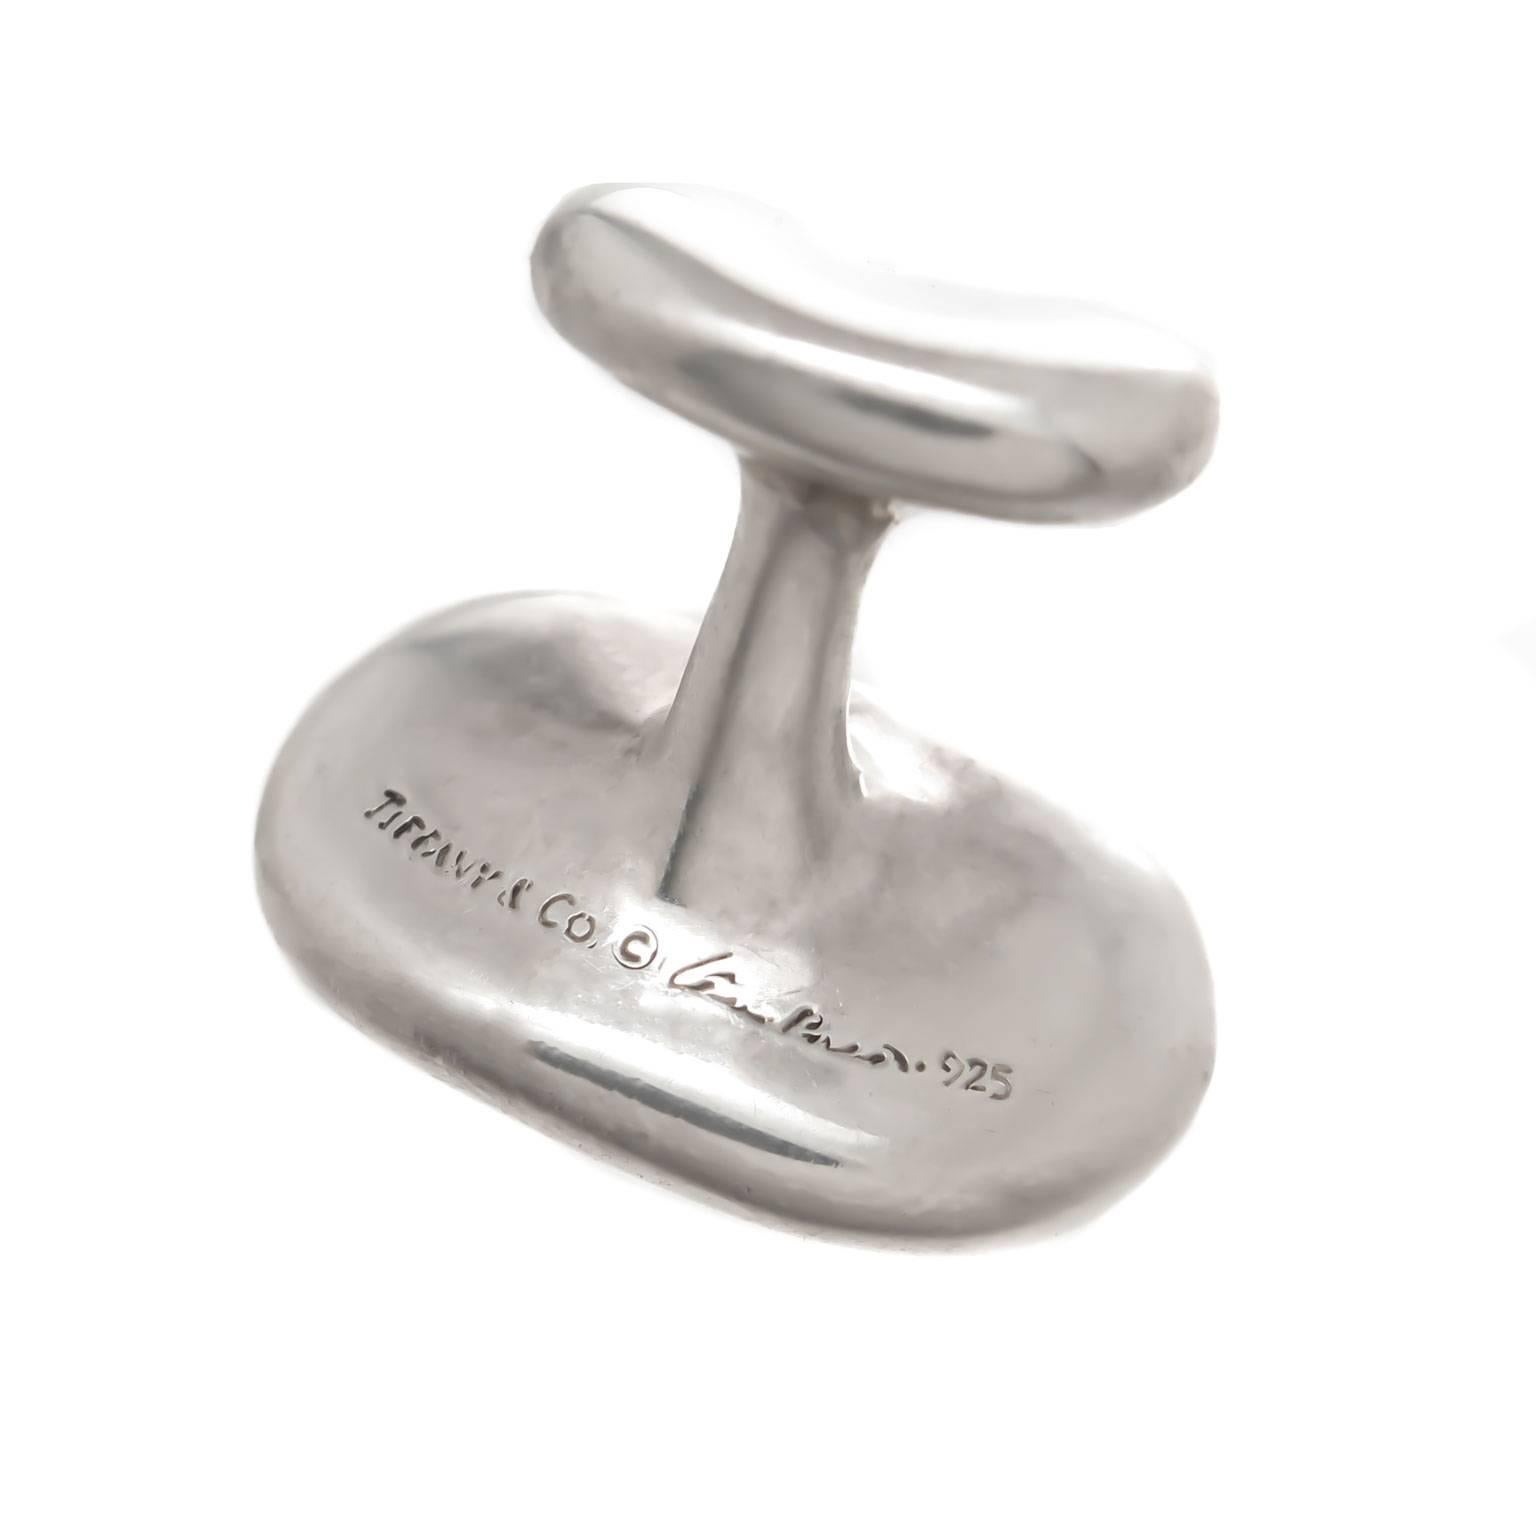 Elsa Peretti for Tiffany & Company Sterling Silver Bean Collection Cufflinks. These are solid and weigh 1 ounce for the pair. Measuring 3/4 inch across the top.